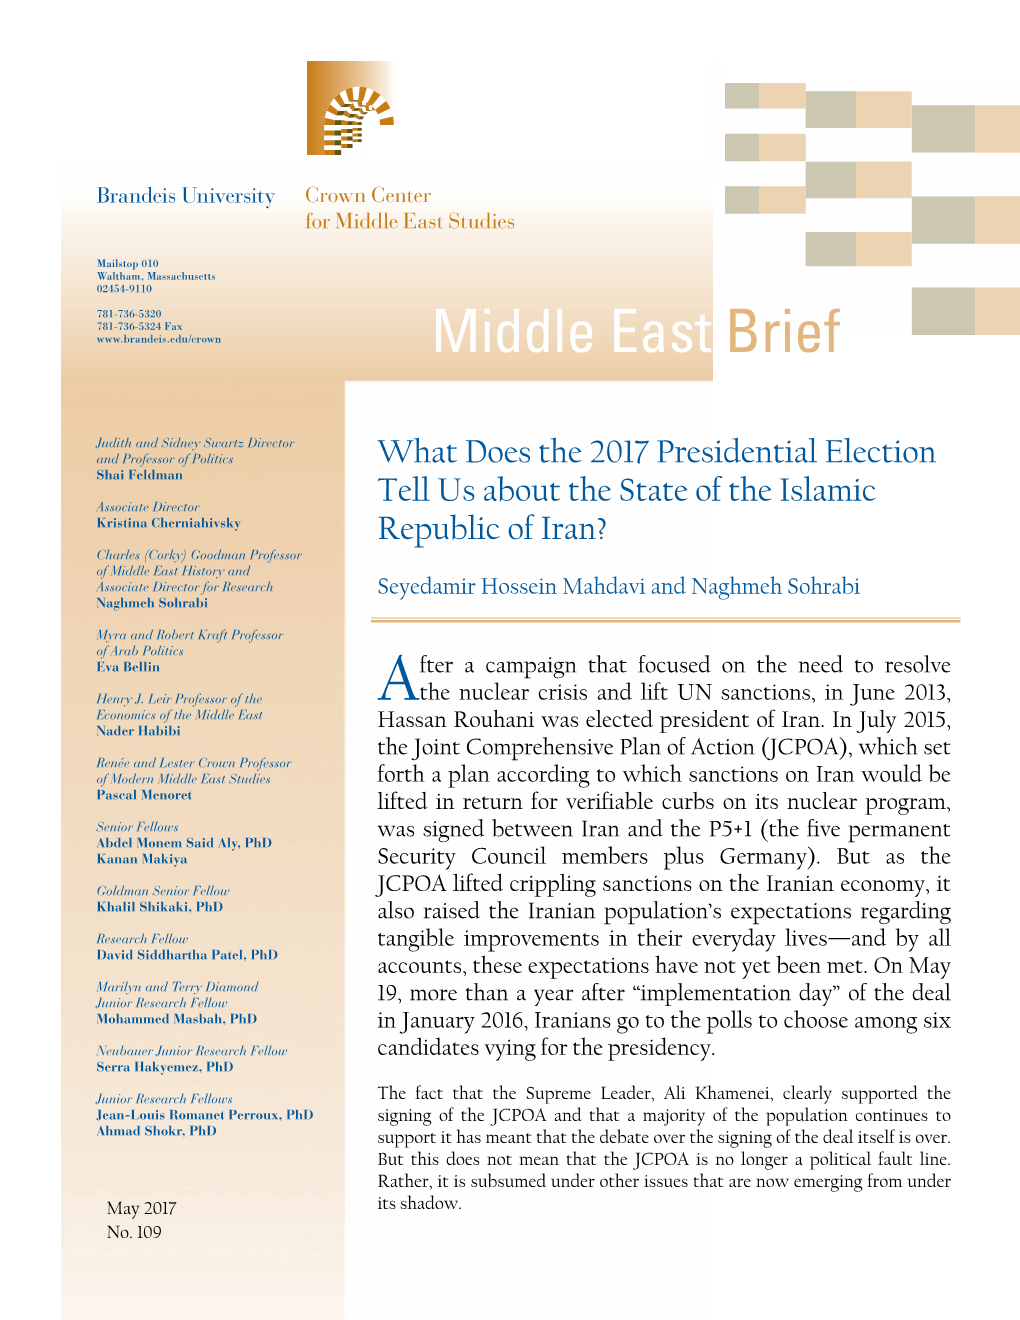 Middle East Brief 109: What Does the 2017 Presidential Election Tell Us About the State of the Islamic Republic of Iran?